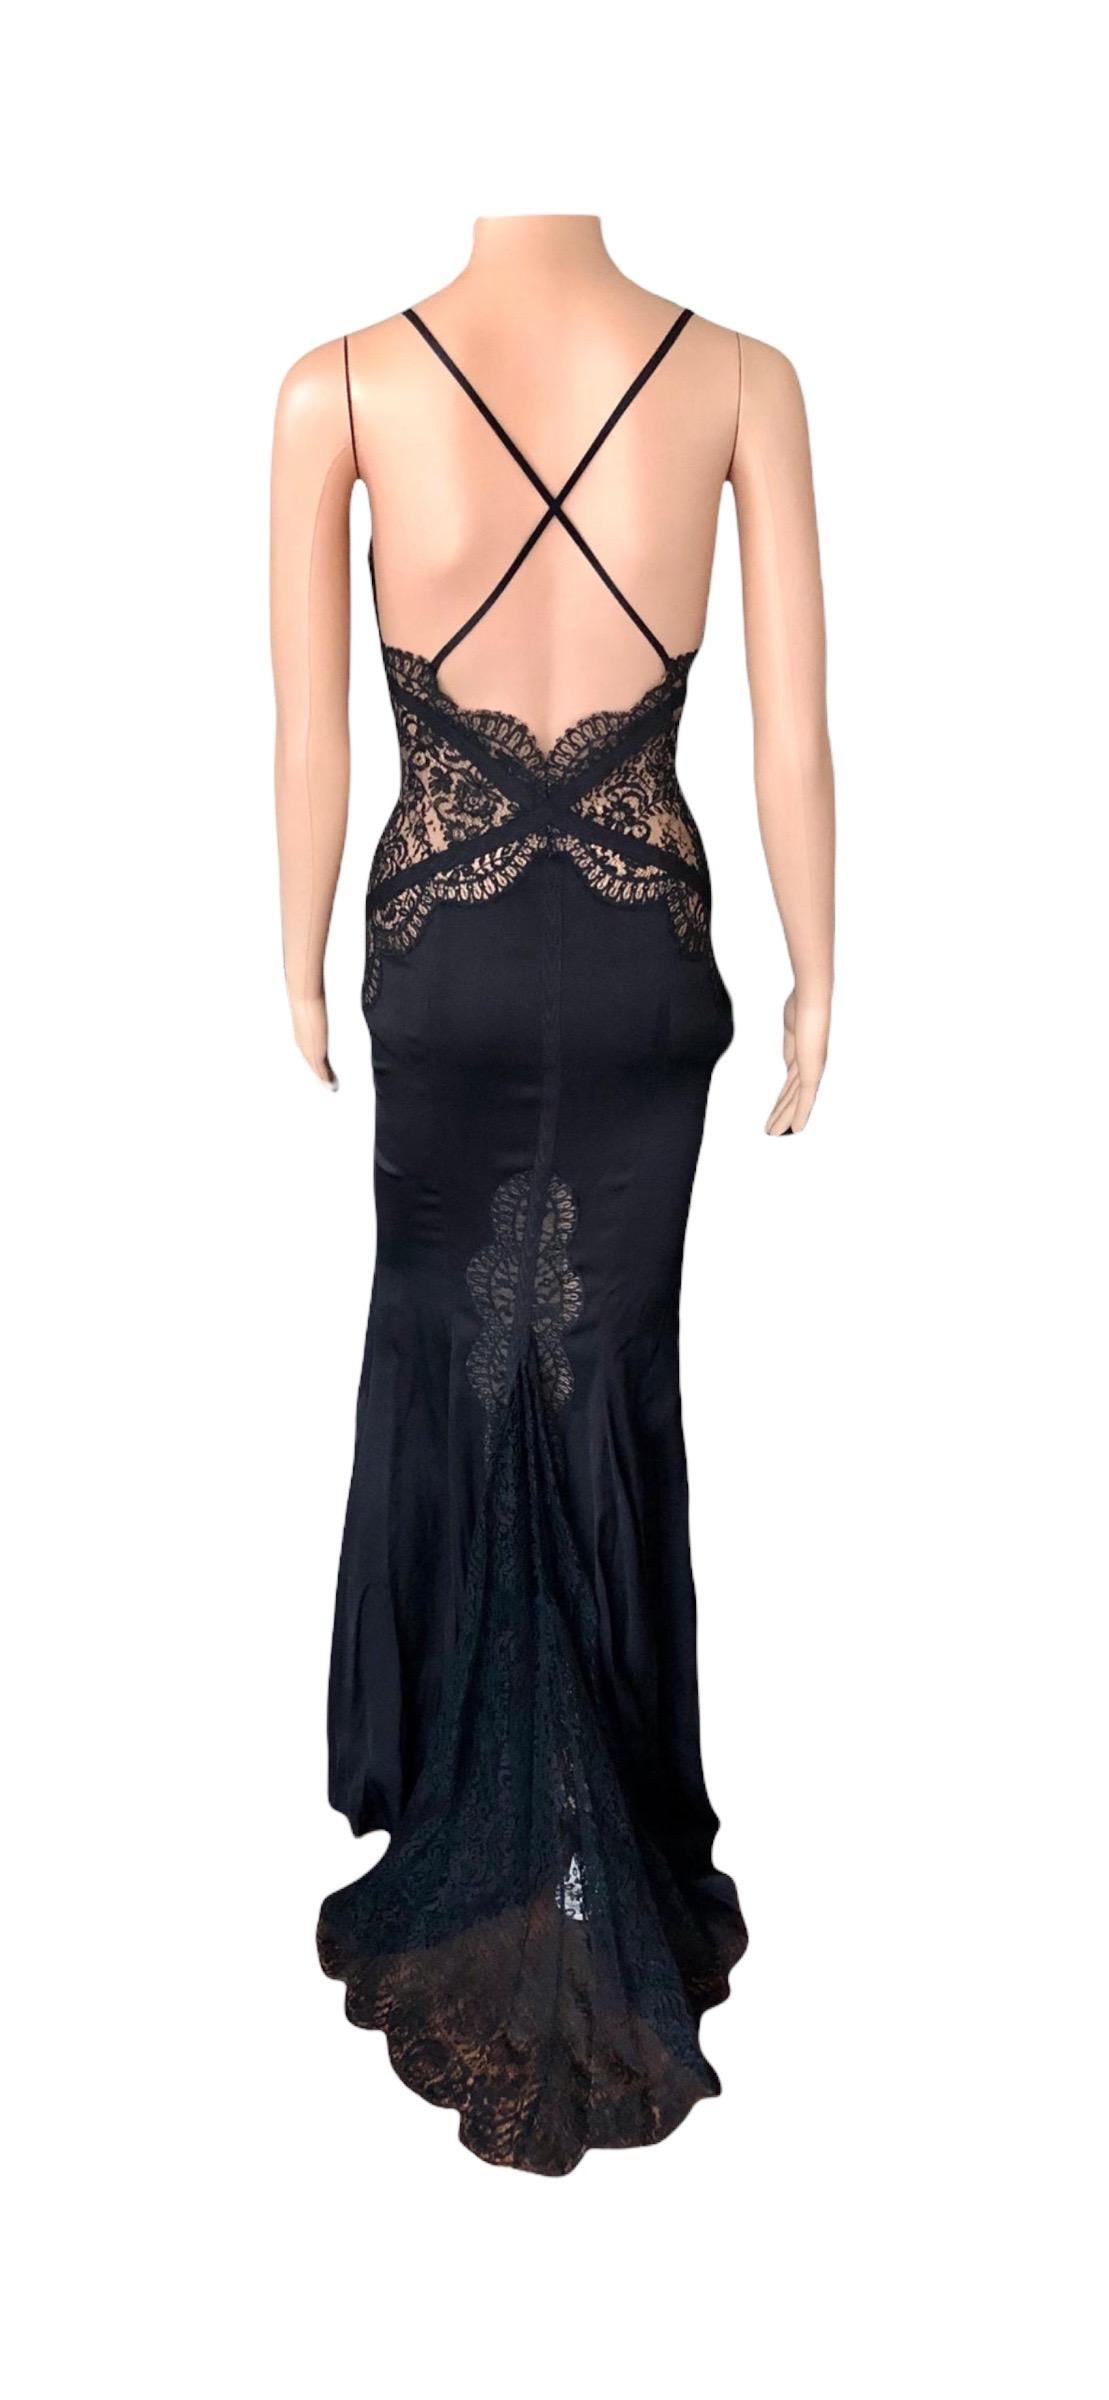 Versace Plunged Sheer Lace Panels Backless Black Evening Dress Gown  In Good Condition For Sale In Naples, FL